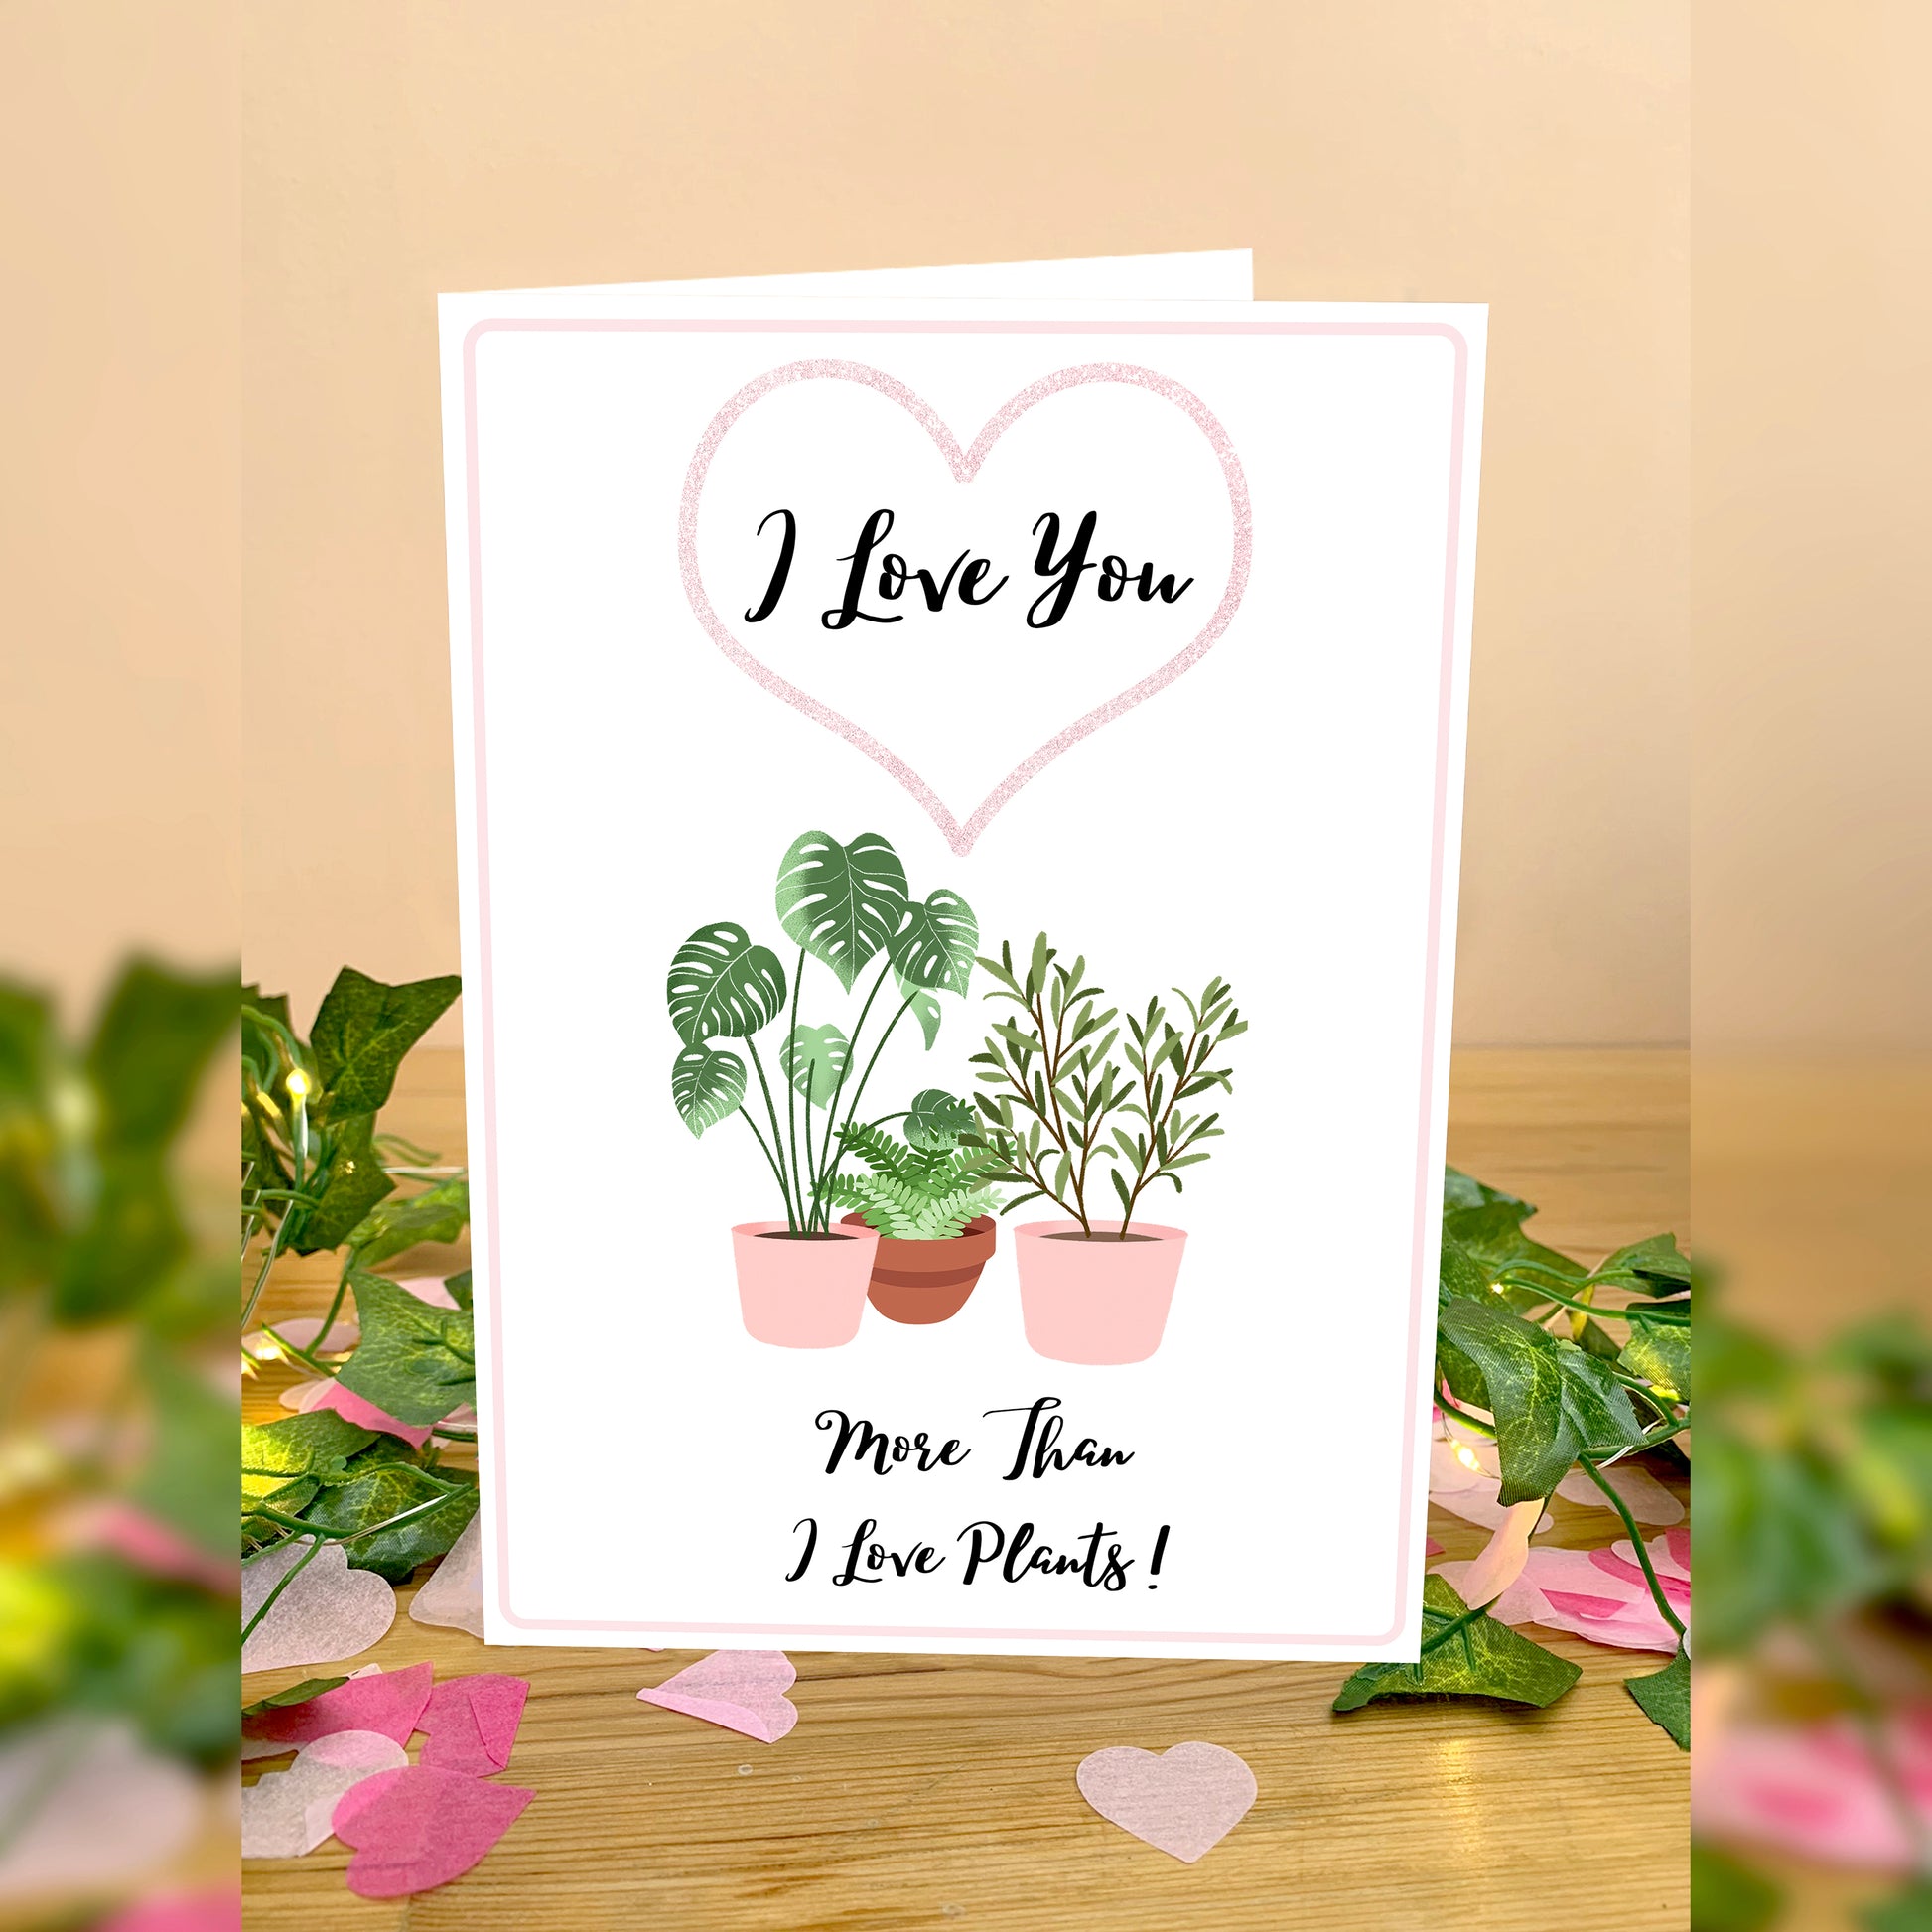 Plant lover Greetings card for anniversary or valentines. White card to 3 House plants in pink plant pots. Wording I love you inside a pink heart outline. Below plant images is wording More than I love plants! In handwriting script text. Flower petals scattered around card placed on a wooden table with leaves on